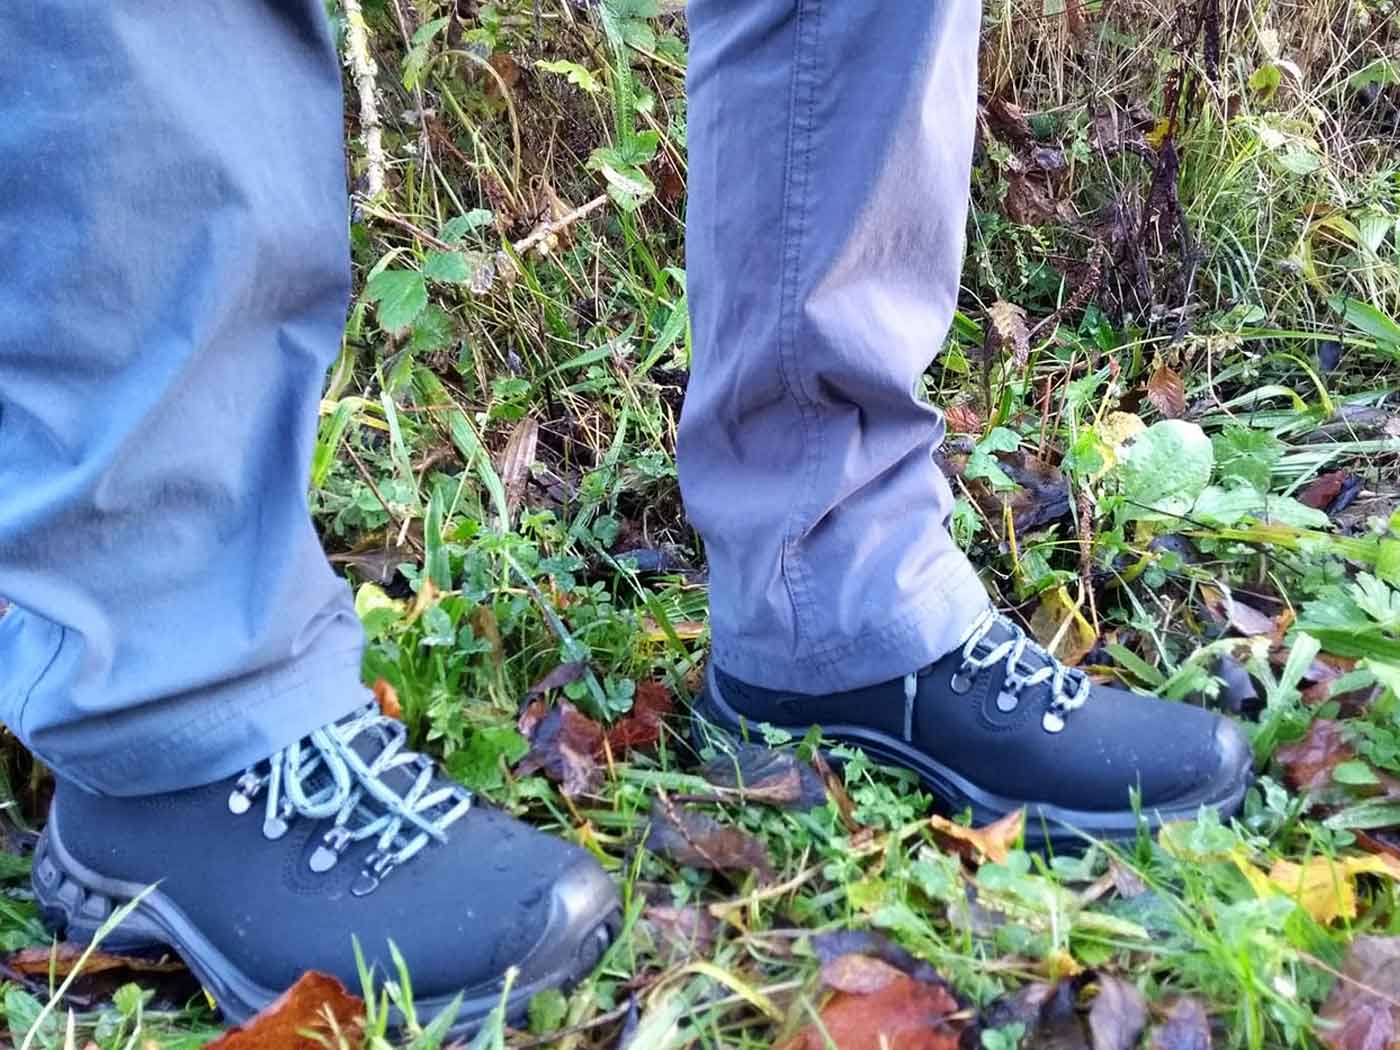 wills vegan shoes hiking boots